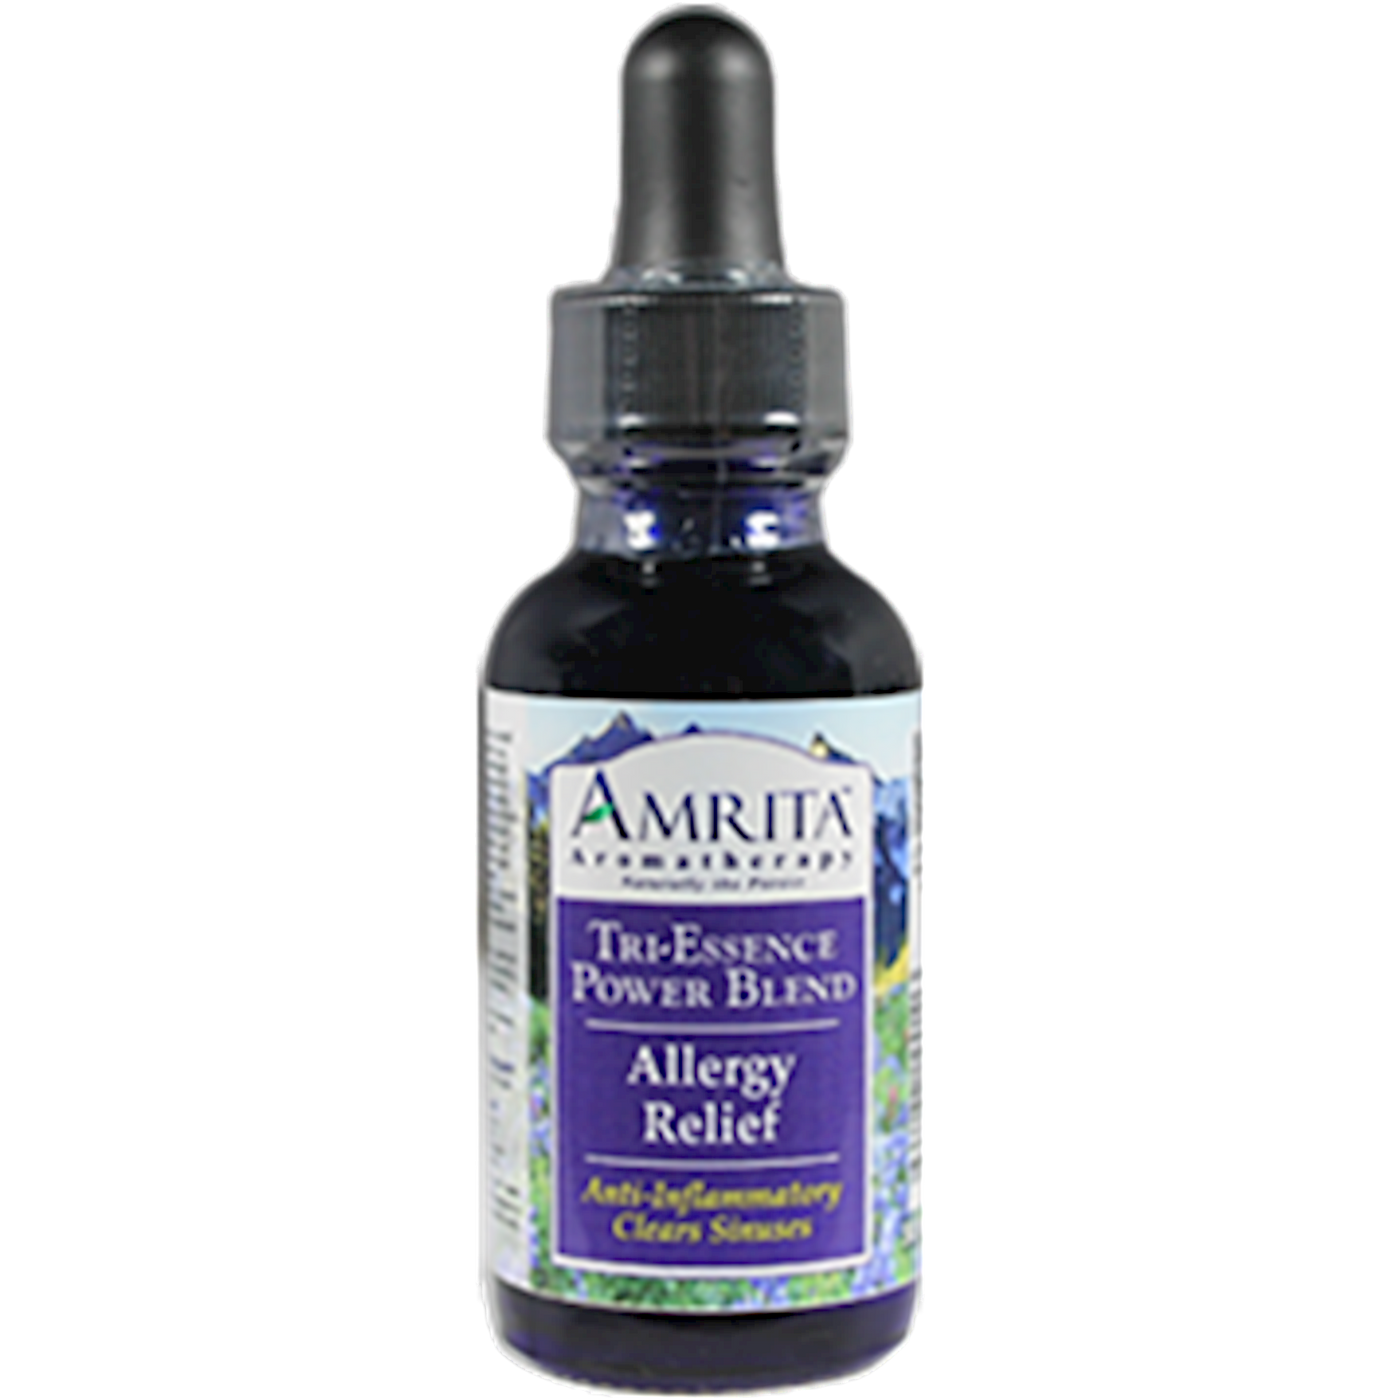 Allergy Relief 1 fl oz Curated Wellness